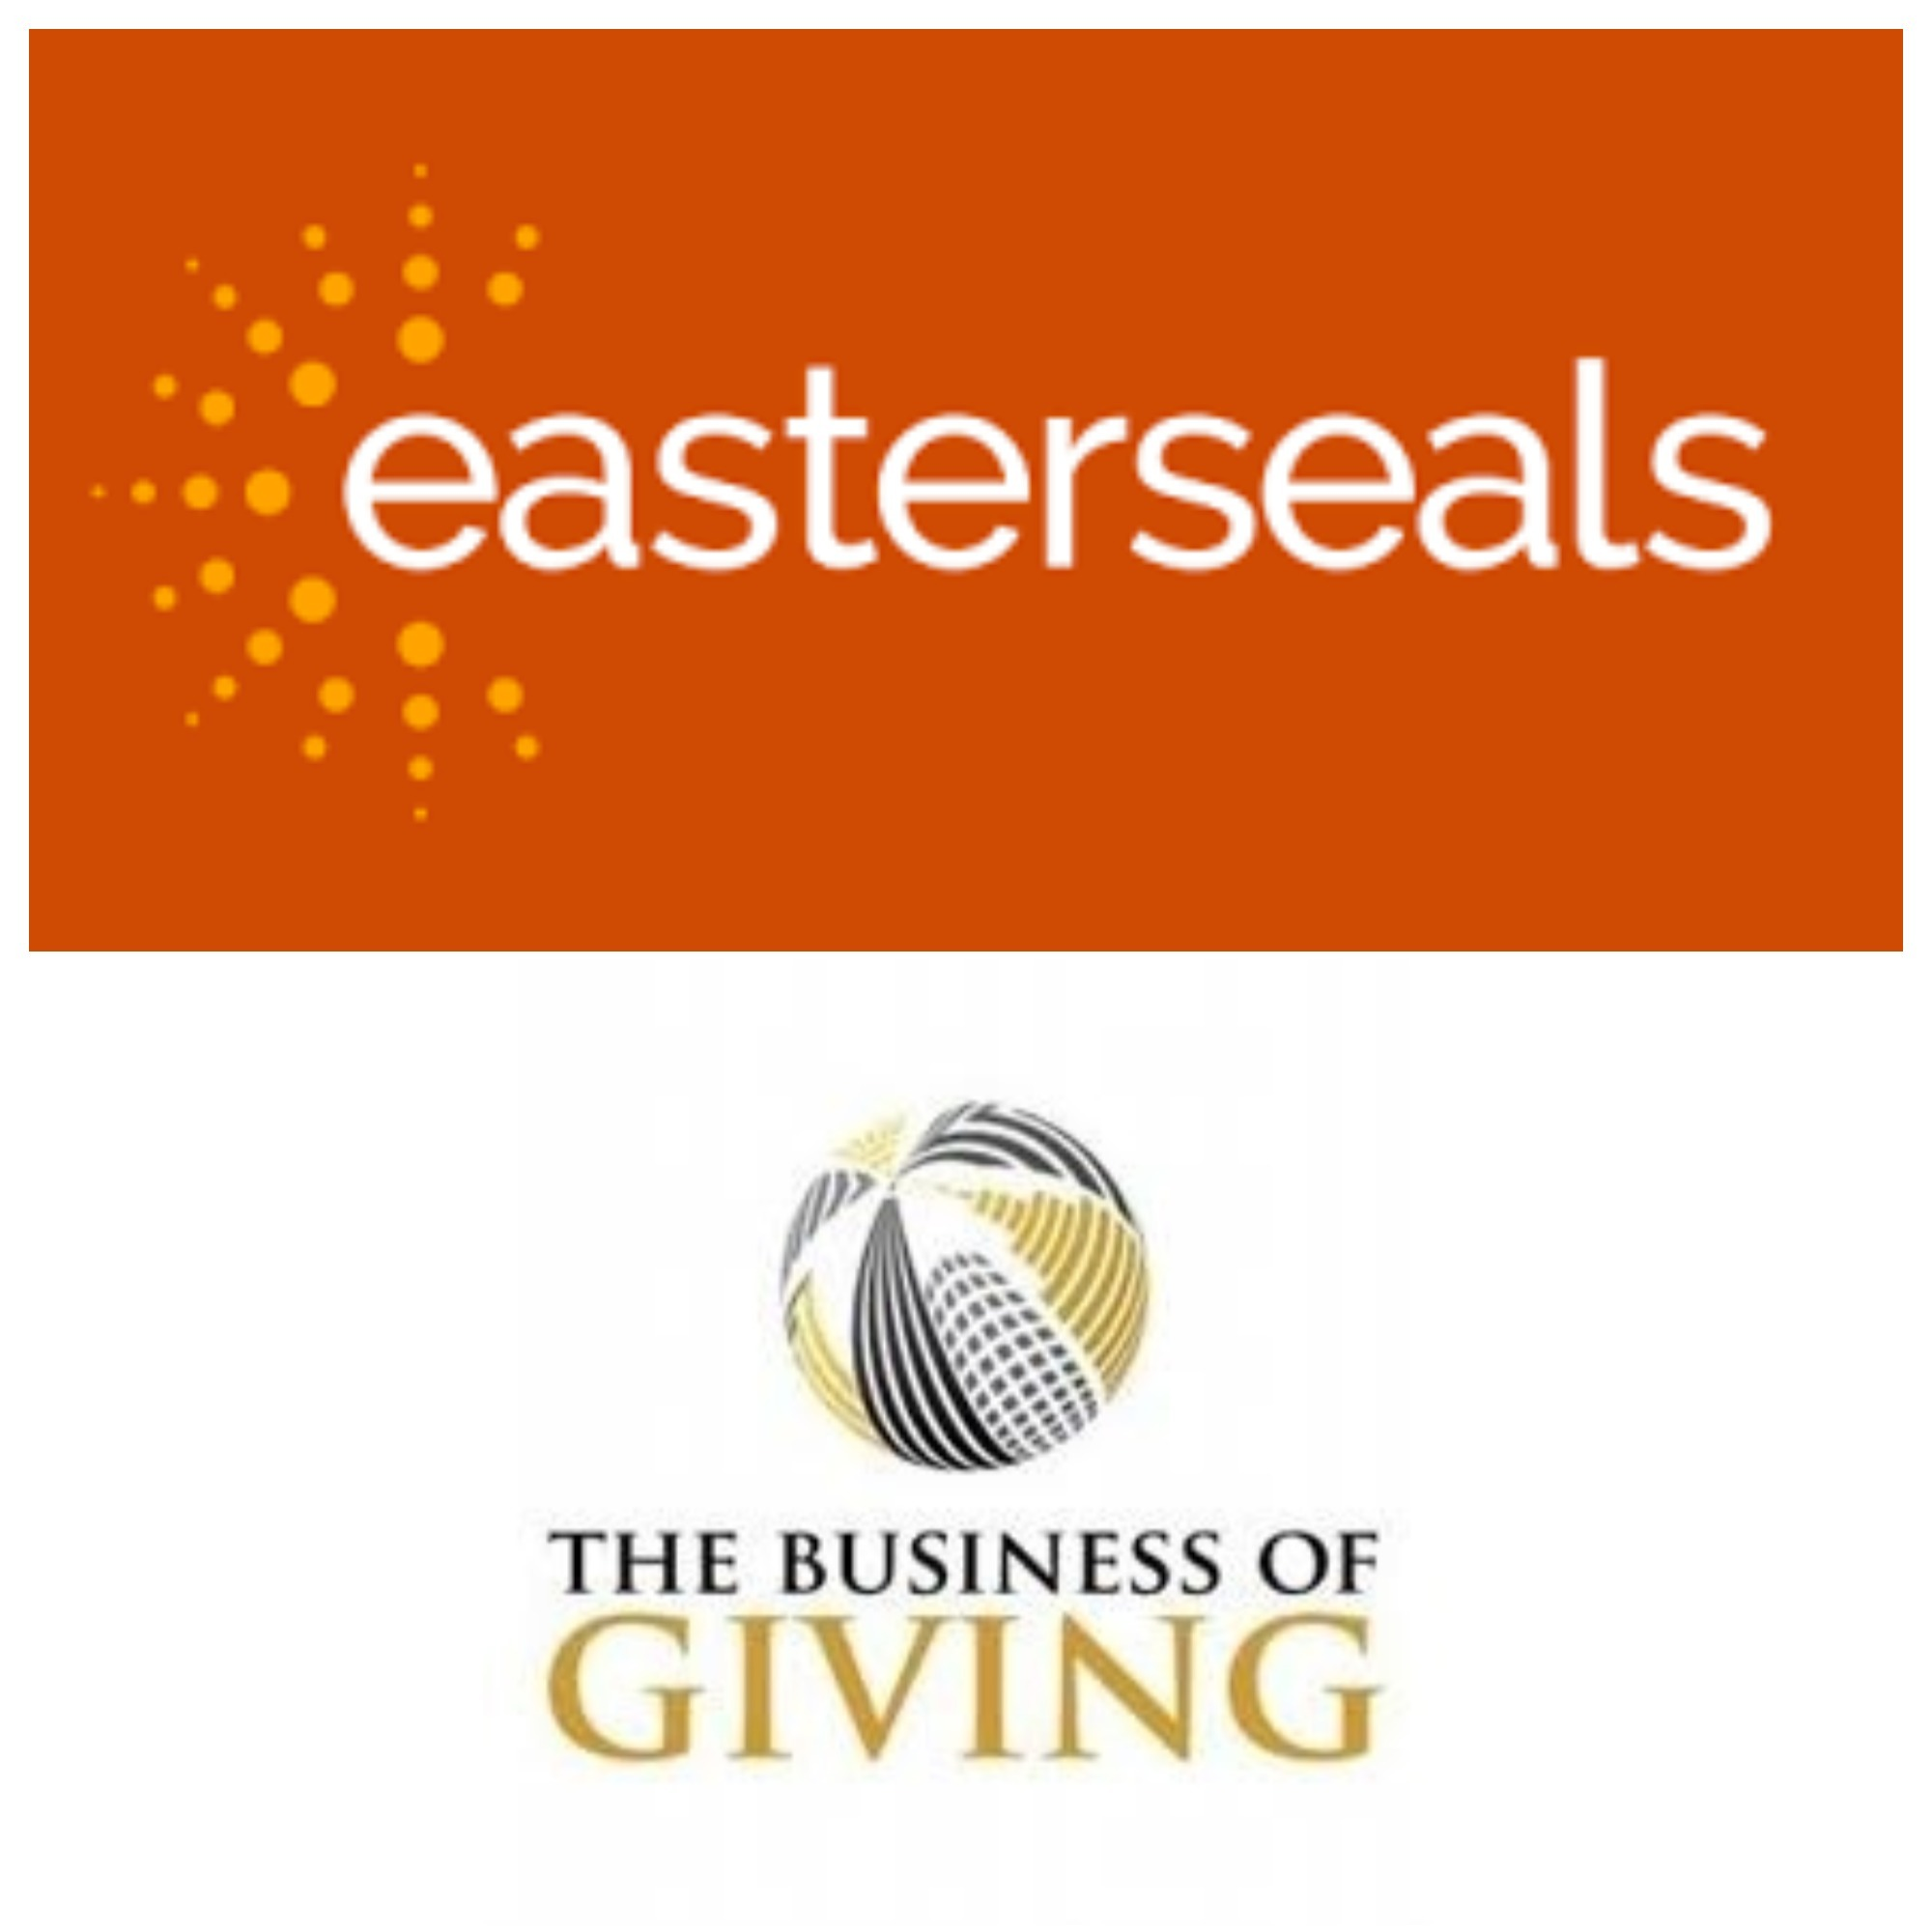 Angela Williams, President & CEO of Easterseals 